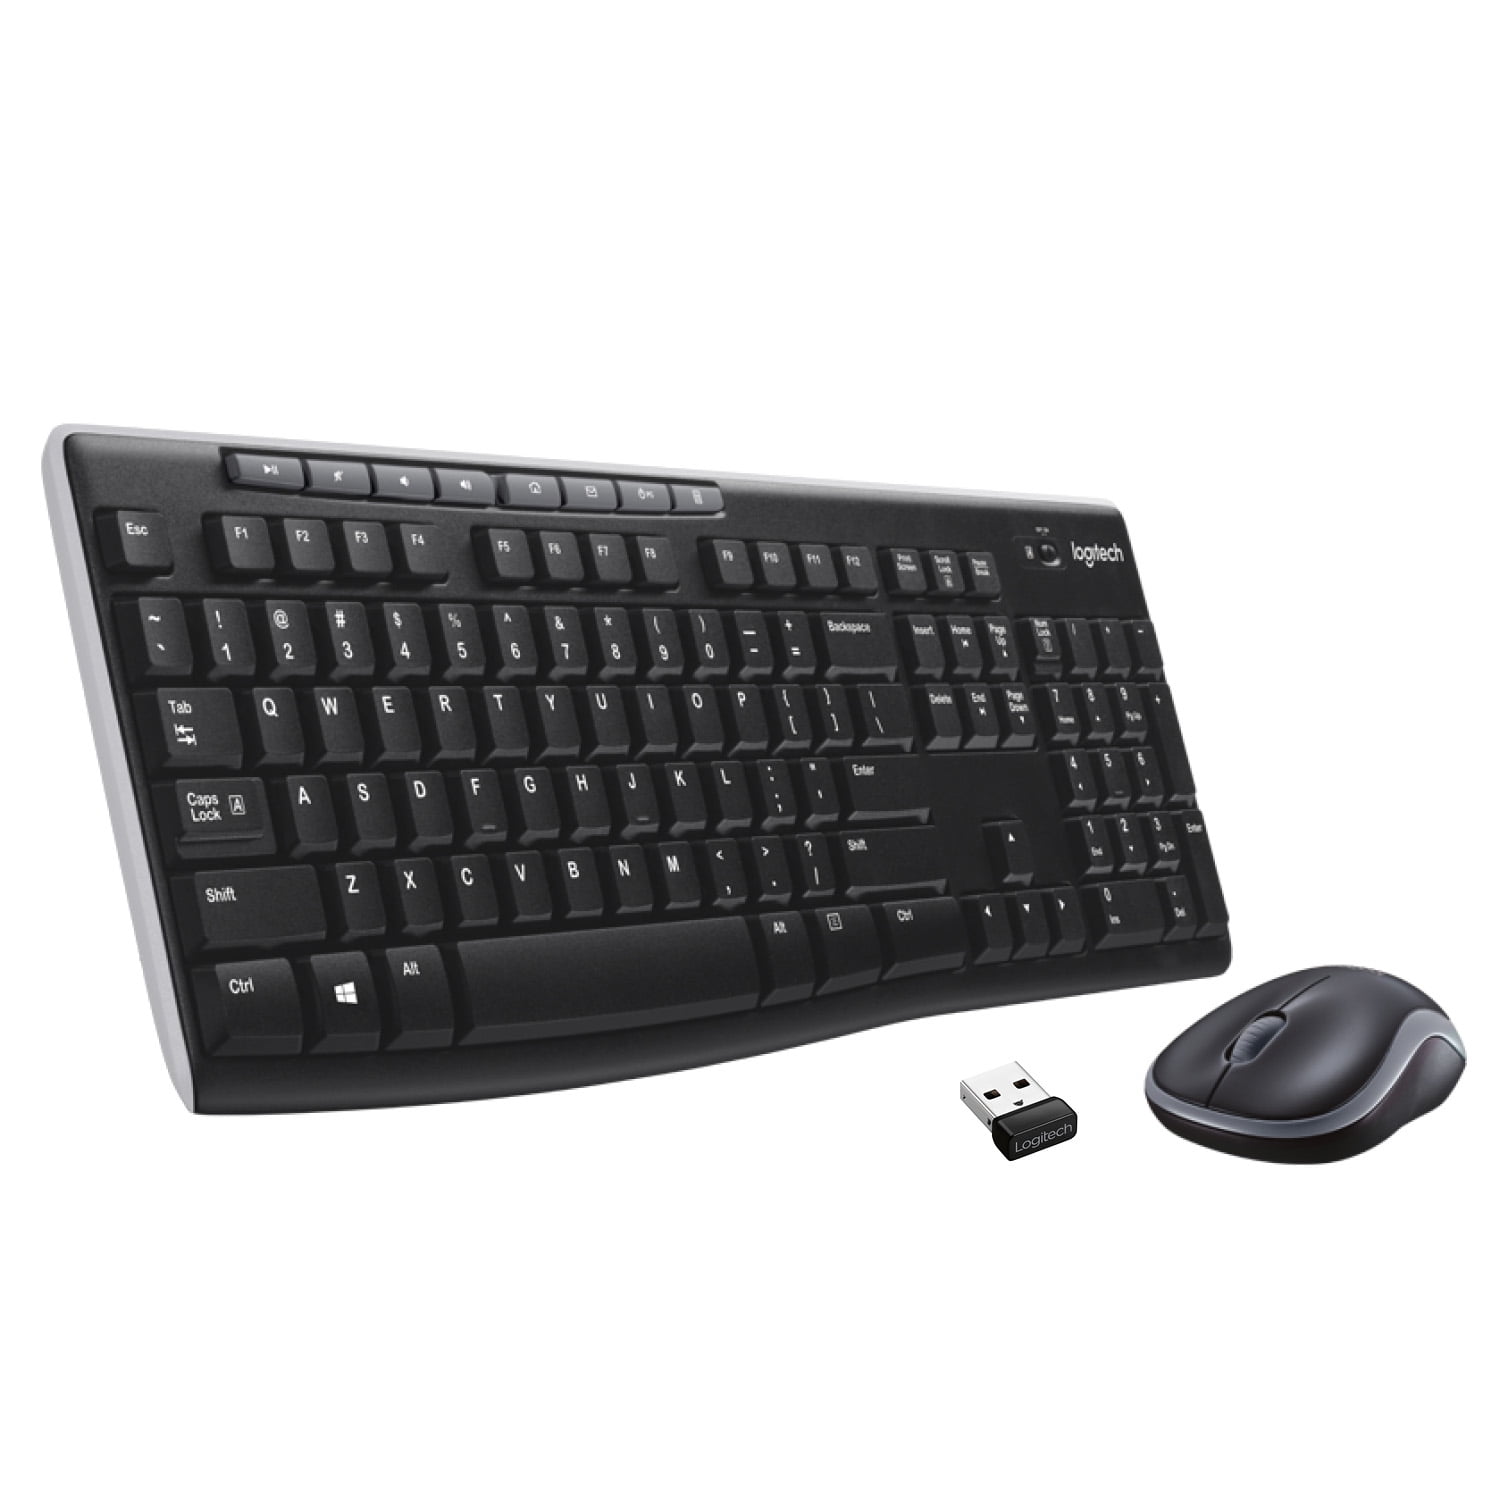 Logitech Wireless Keyboard and Mouse Combo for Windows, 2.4 GHz Wireless, Compact Mouse, 8 Multimedia and Shortcut Keys, 2-Year Battery Life, for PC, Laptop